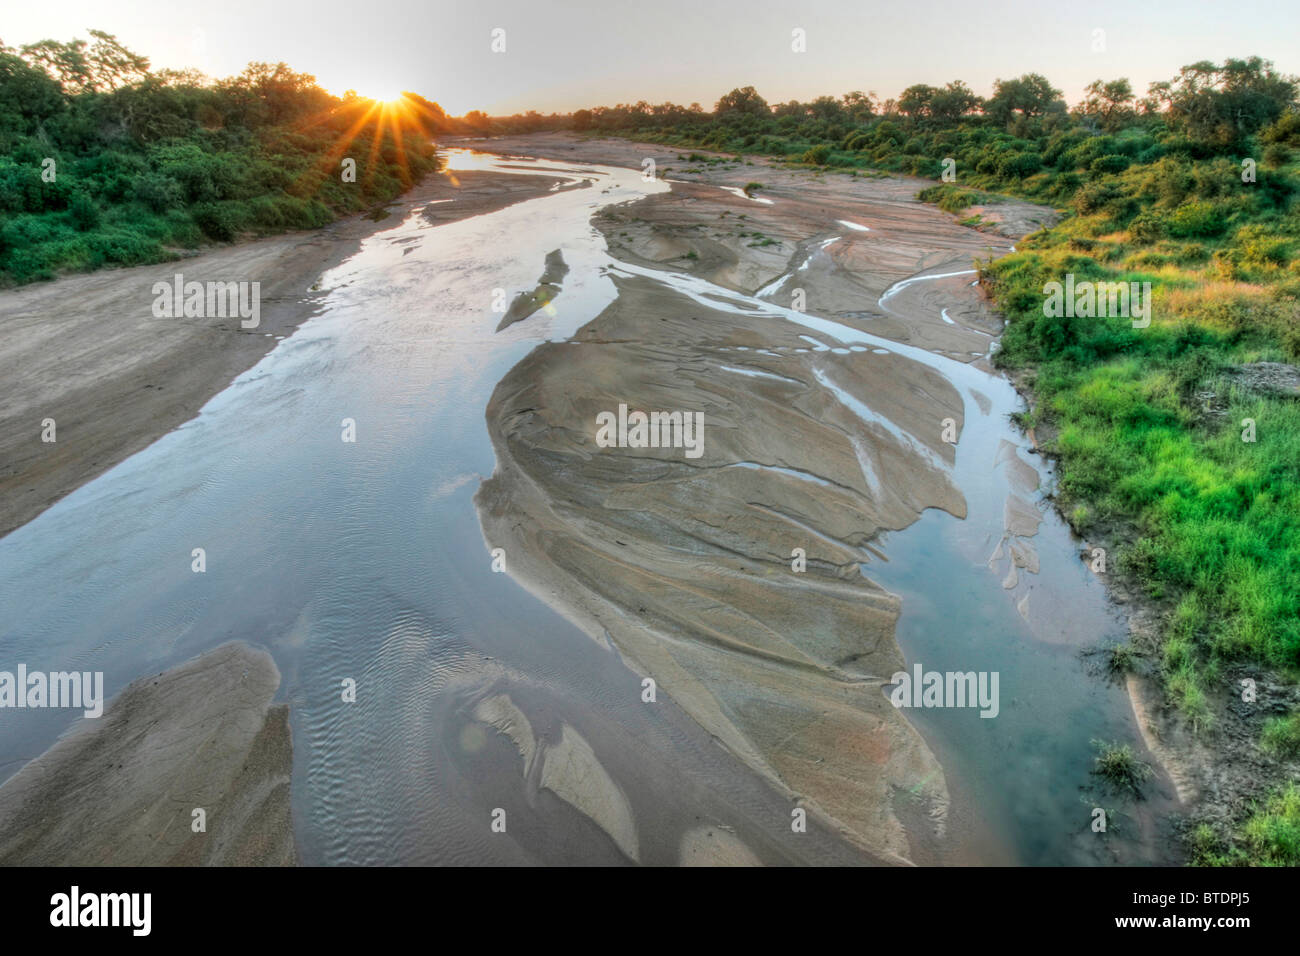 A river bed with seasonal water flowing around sand banks Stock Photo